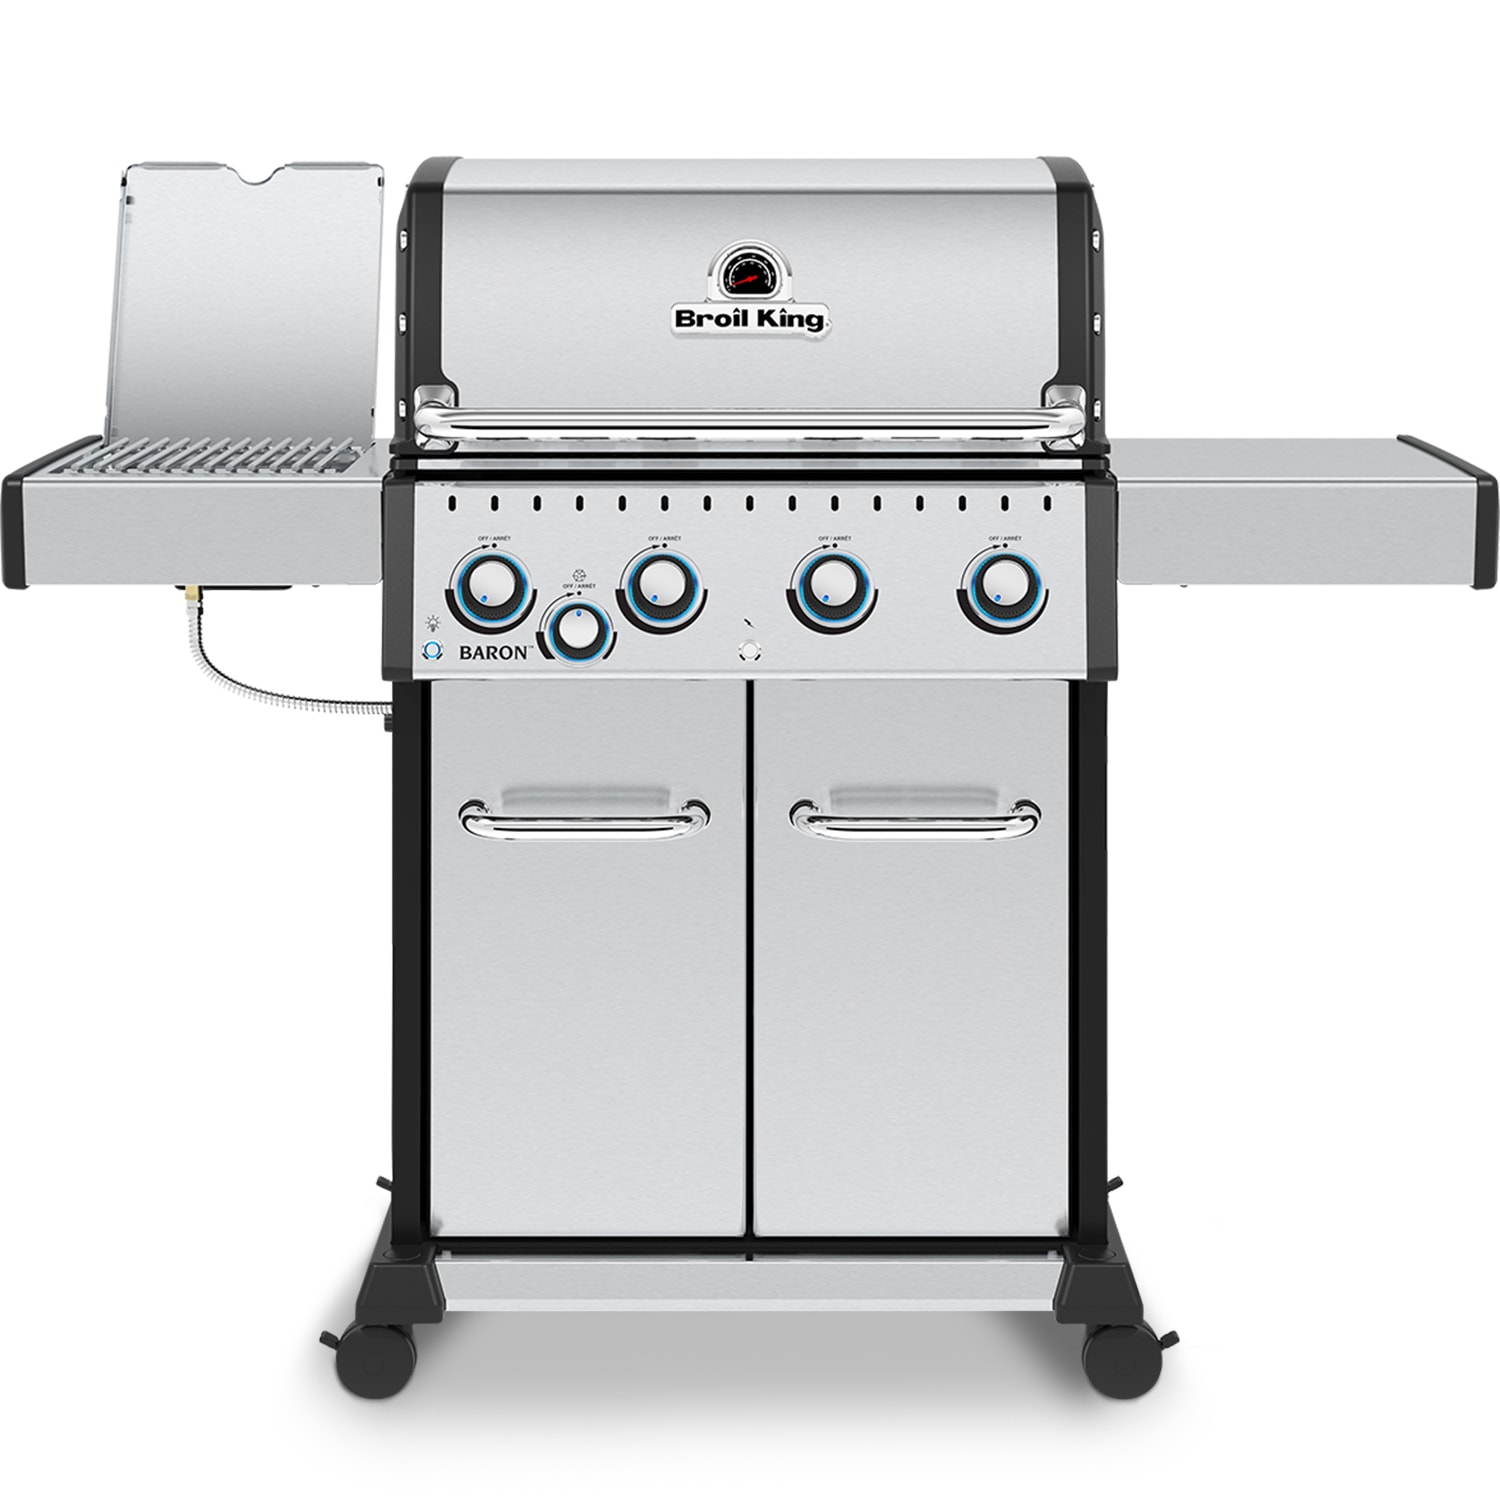 serviet frokost komprimeret Broil King Baron S 440 Pro IR Stainless Steel 4-Burner Natural Gas Infrared Gas  Grill with 1 Side Burner in the Gas Grills department at Lowes.com